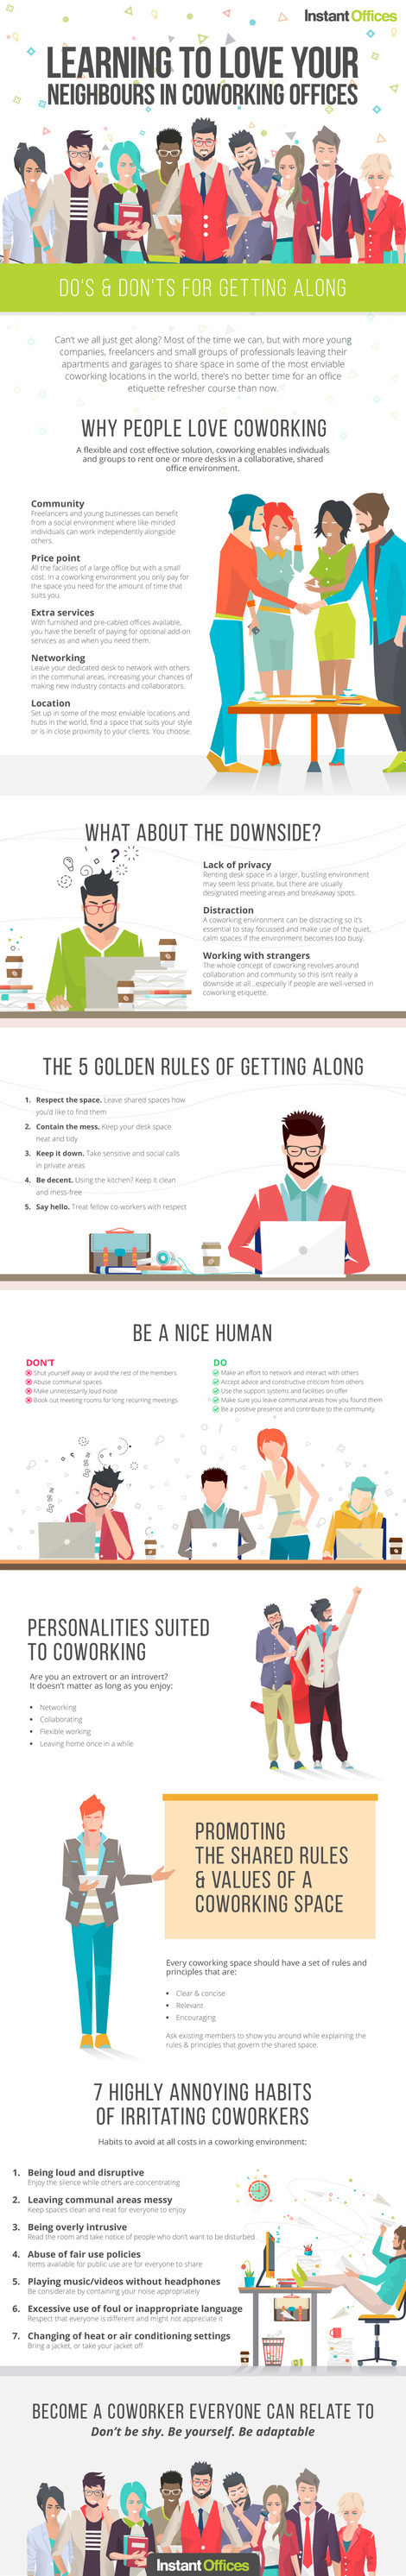 infographic_learning-to-love-your-coworkers